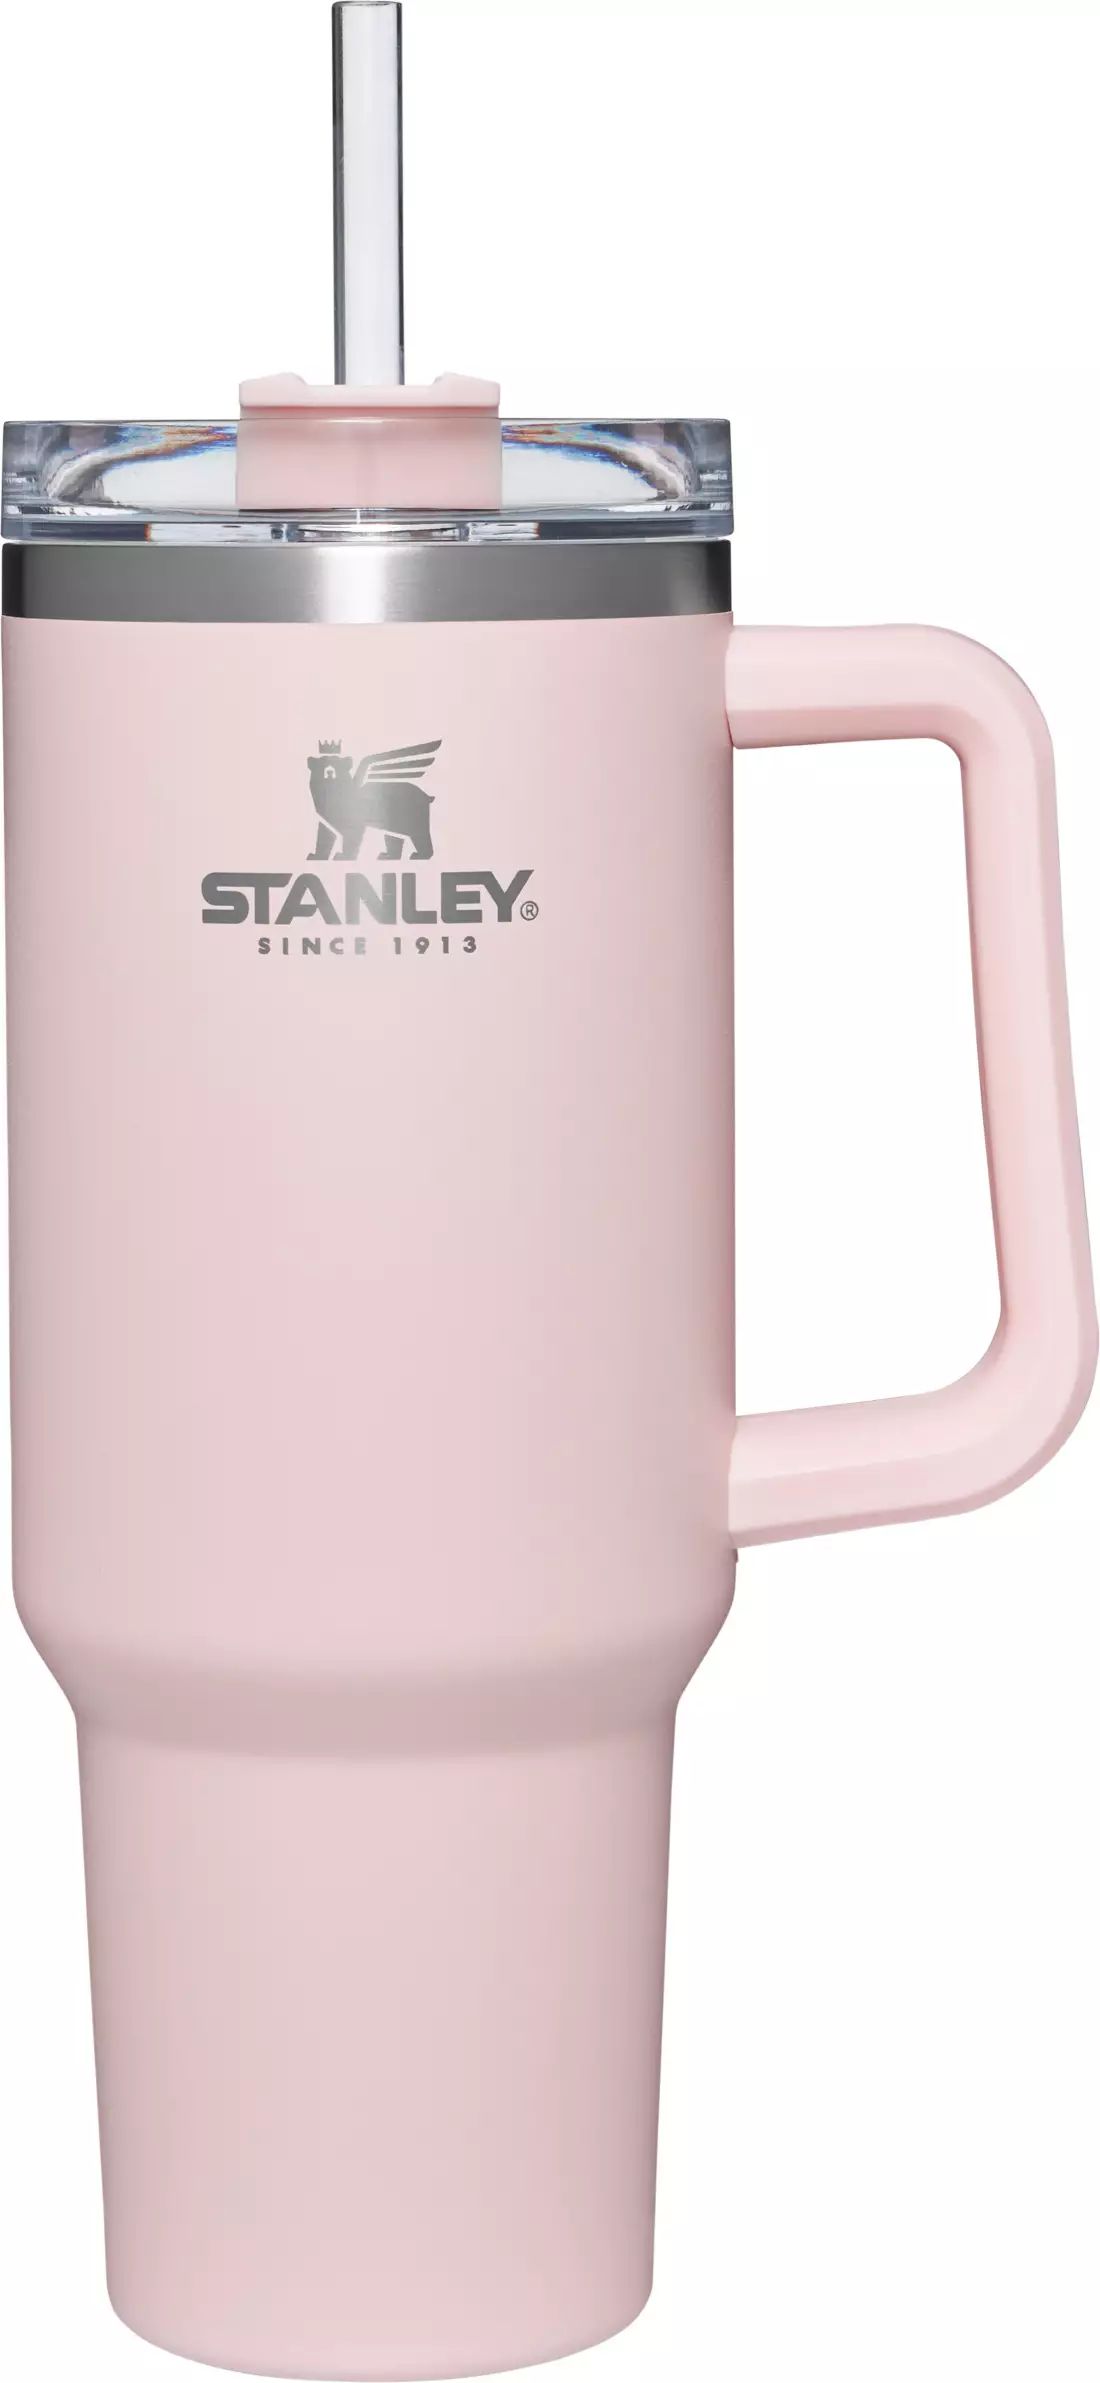 Stanley 40 oz. Adventure Quencher Tumbler | Holiday Deals at DICK'S | Dick's Sporting Goods